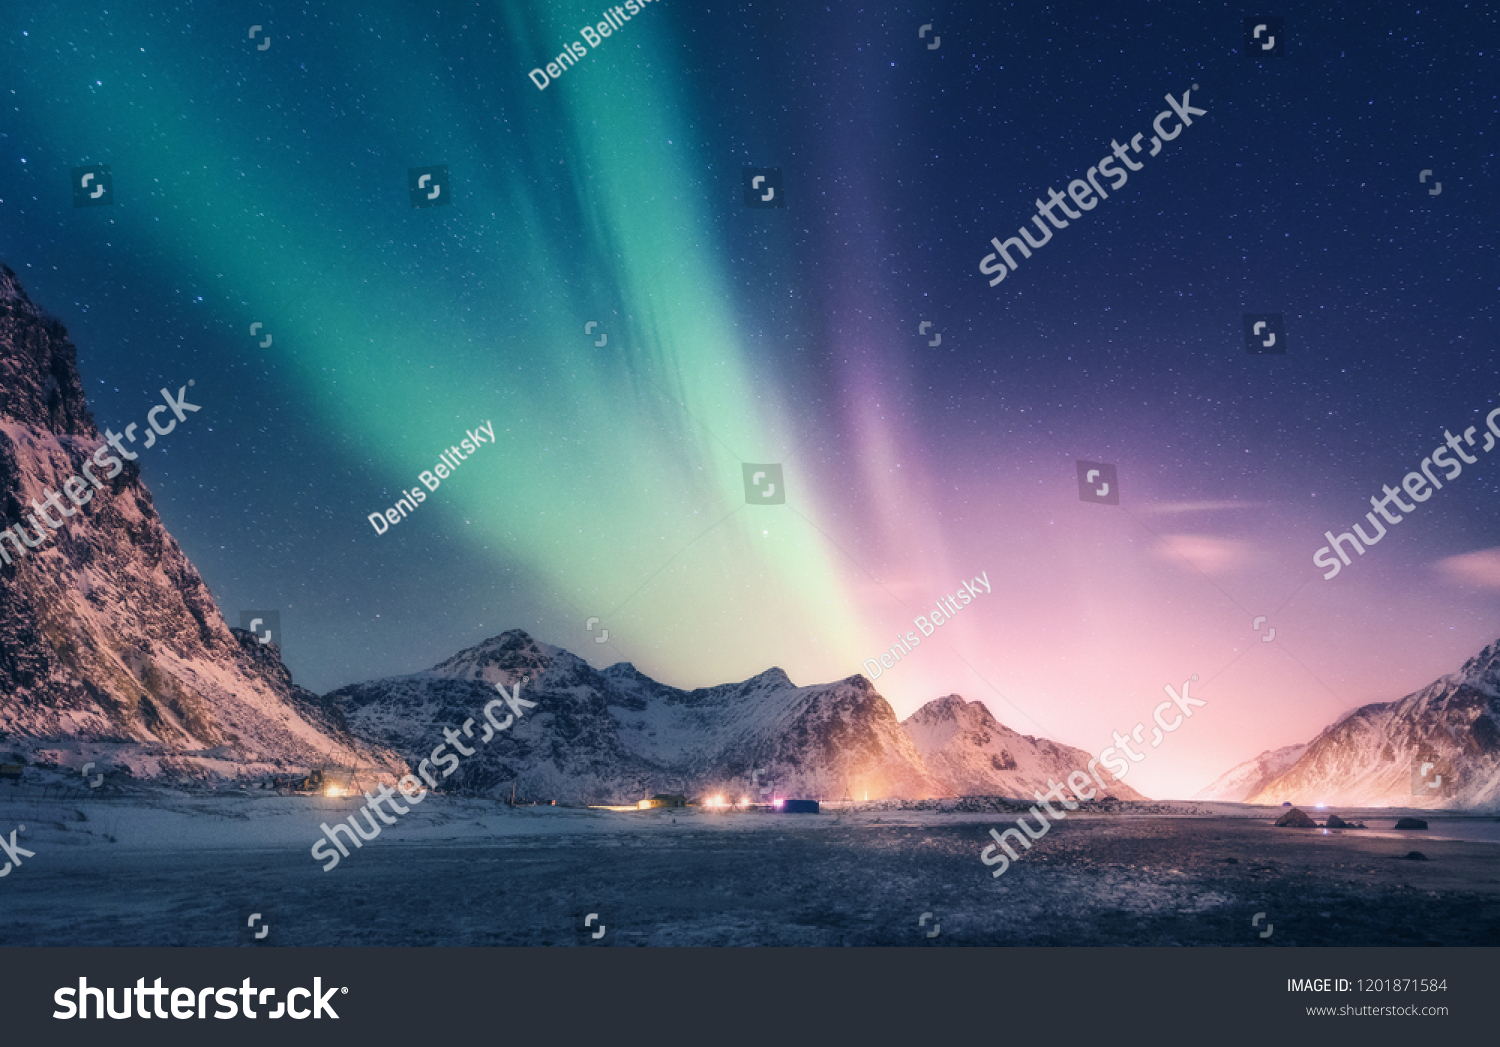 Green and purple aurora borealis over snowy mountains. Northern lights in Lofoten islands, Norway. Starry sky with polar lights. Night winter landscape with aurora, high rocks, beach. Travel. Scenery #1201871584